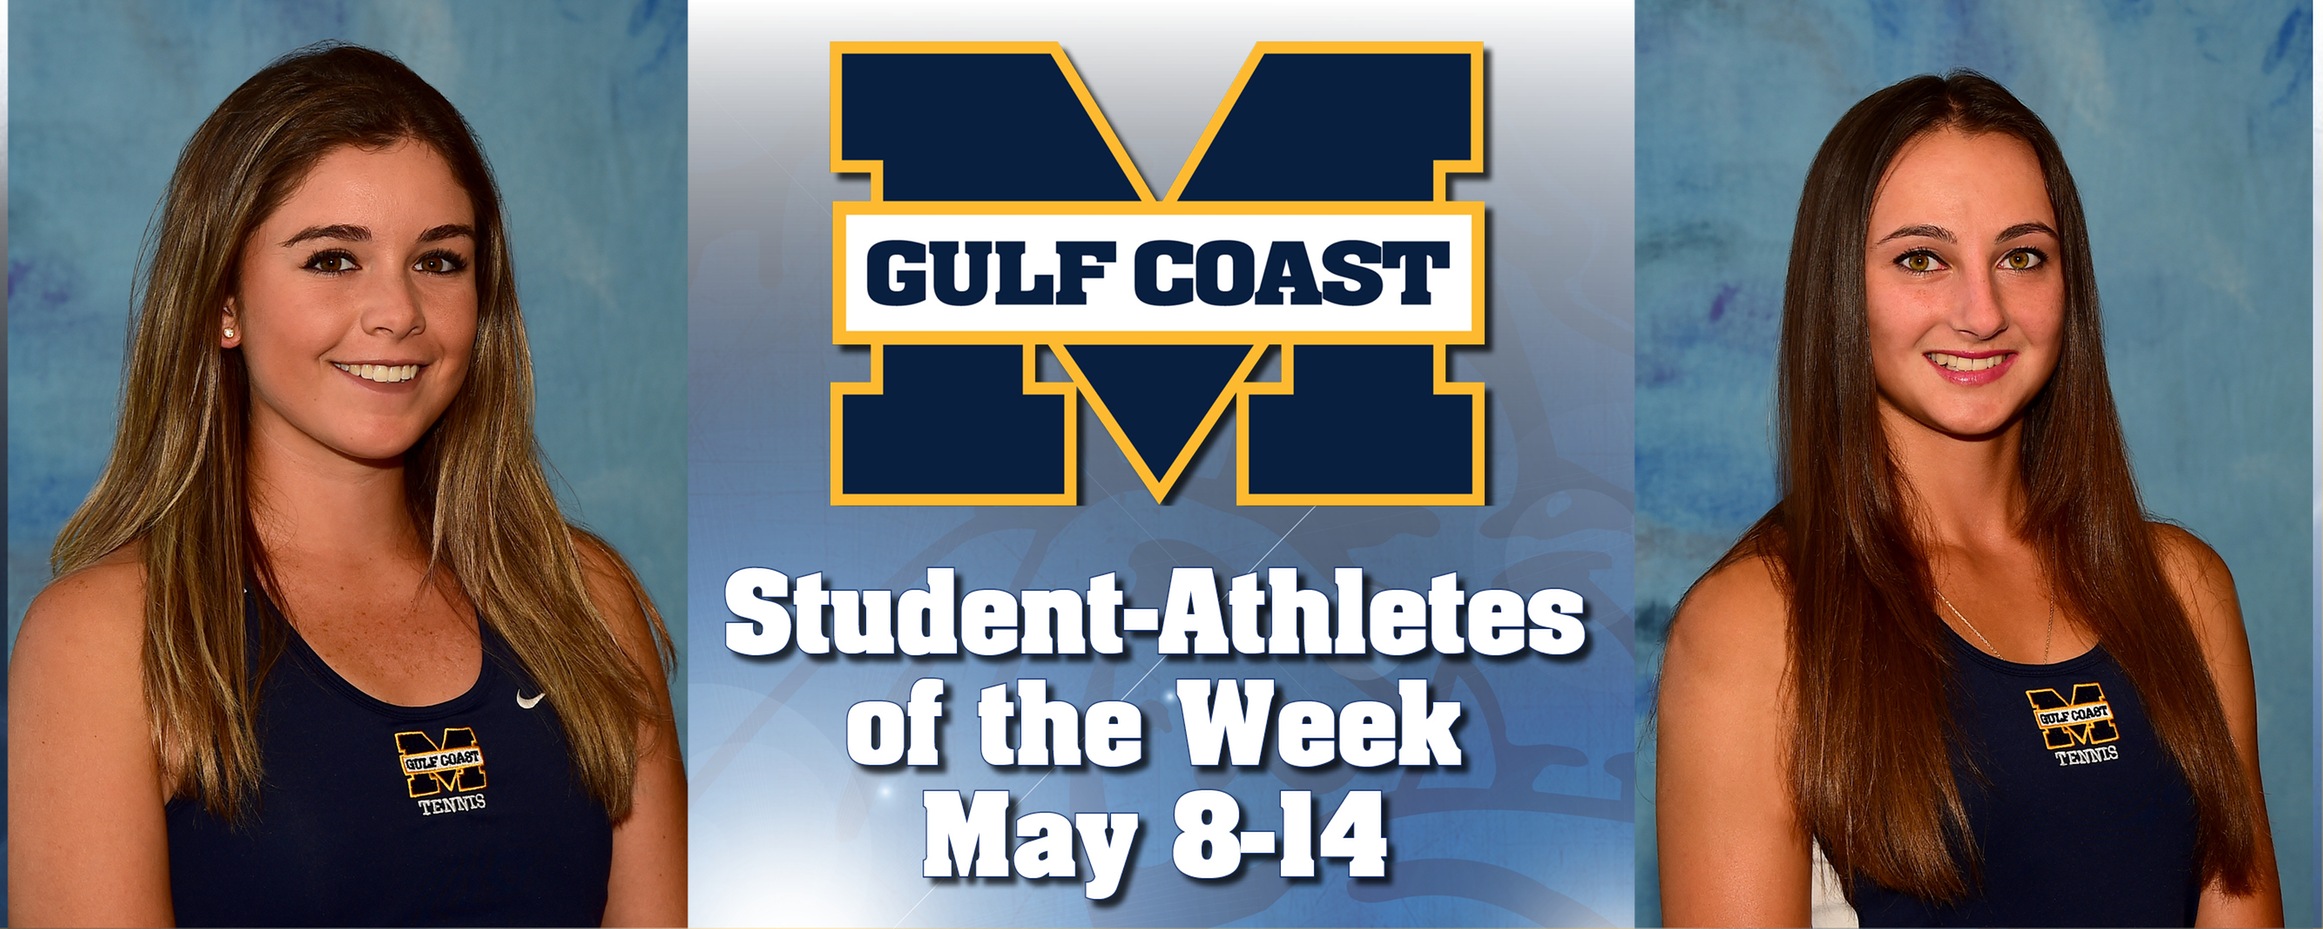 Estrada, Buie named MGCCC Student-Athletes of the Week